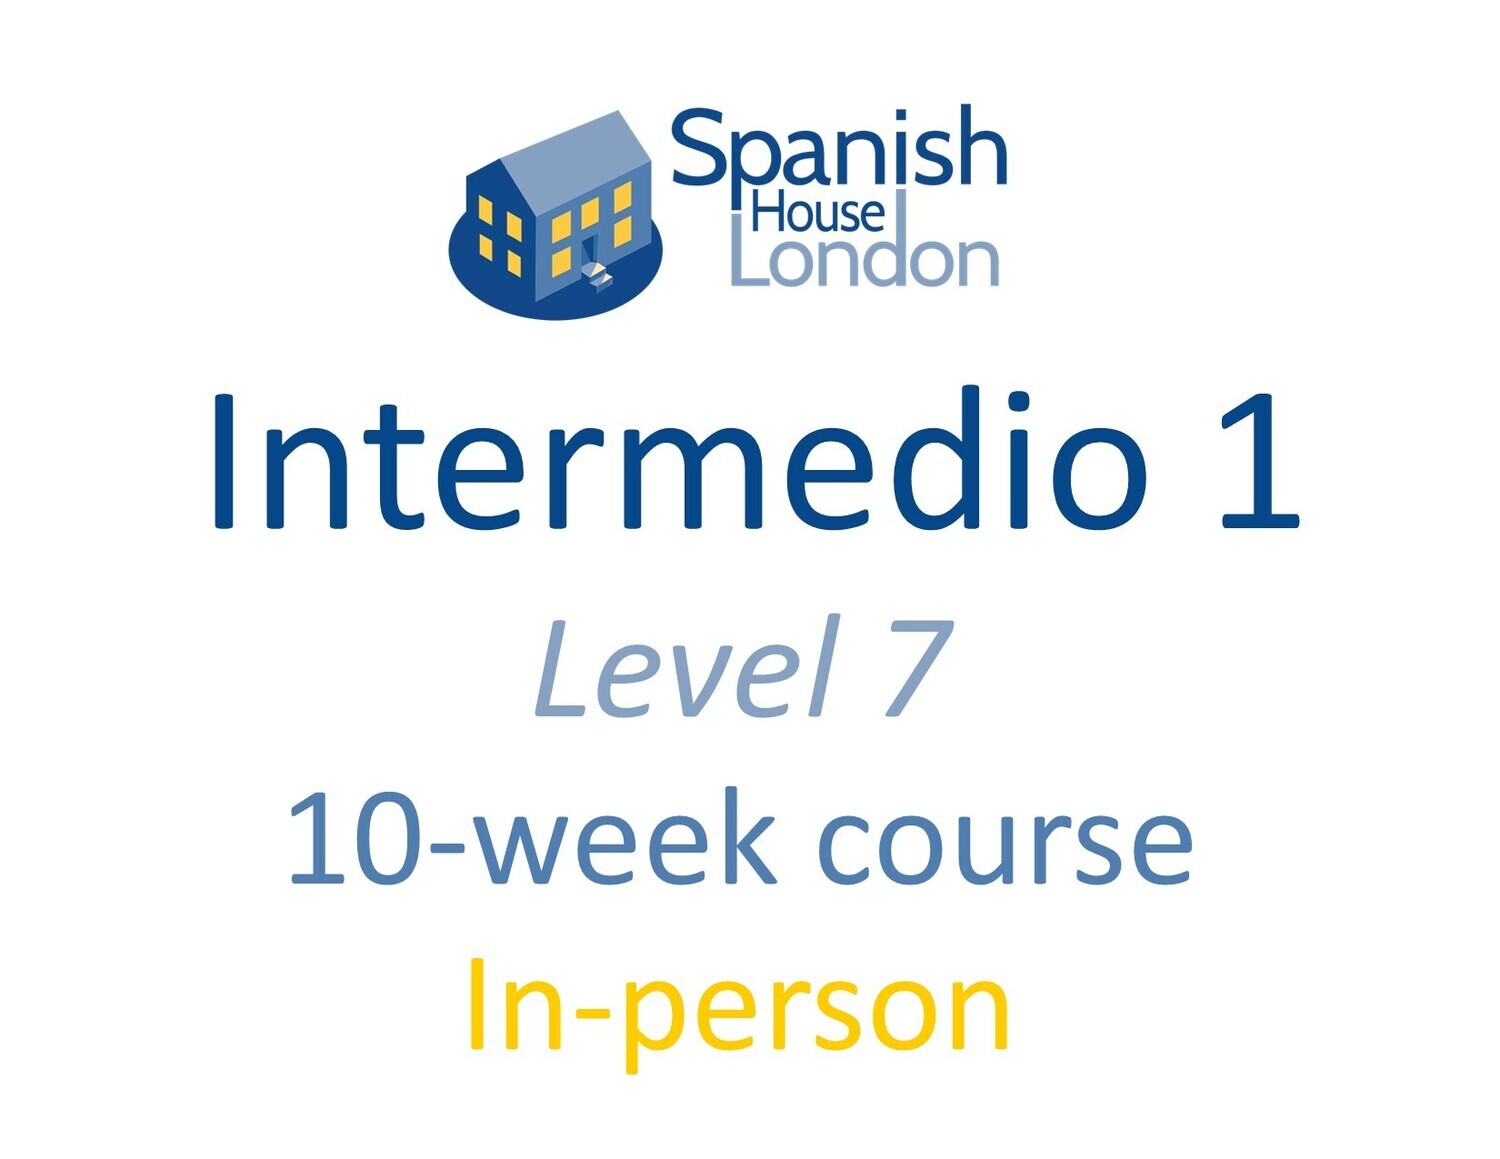 Intermedio 1 Course starting on 17th November at 4.15pm in Clapham North